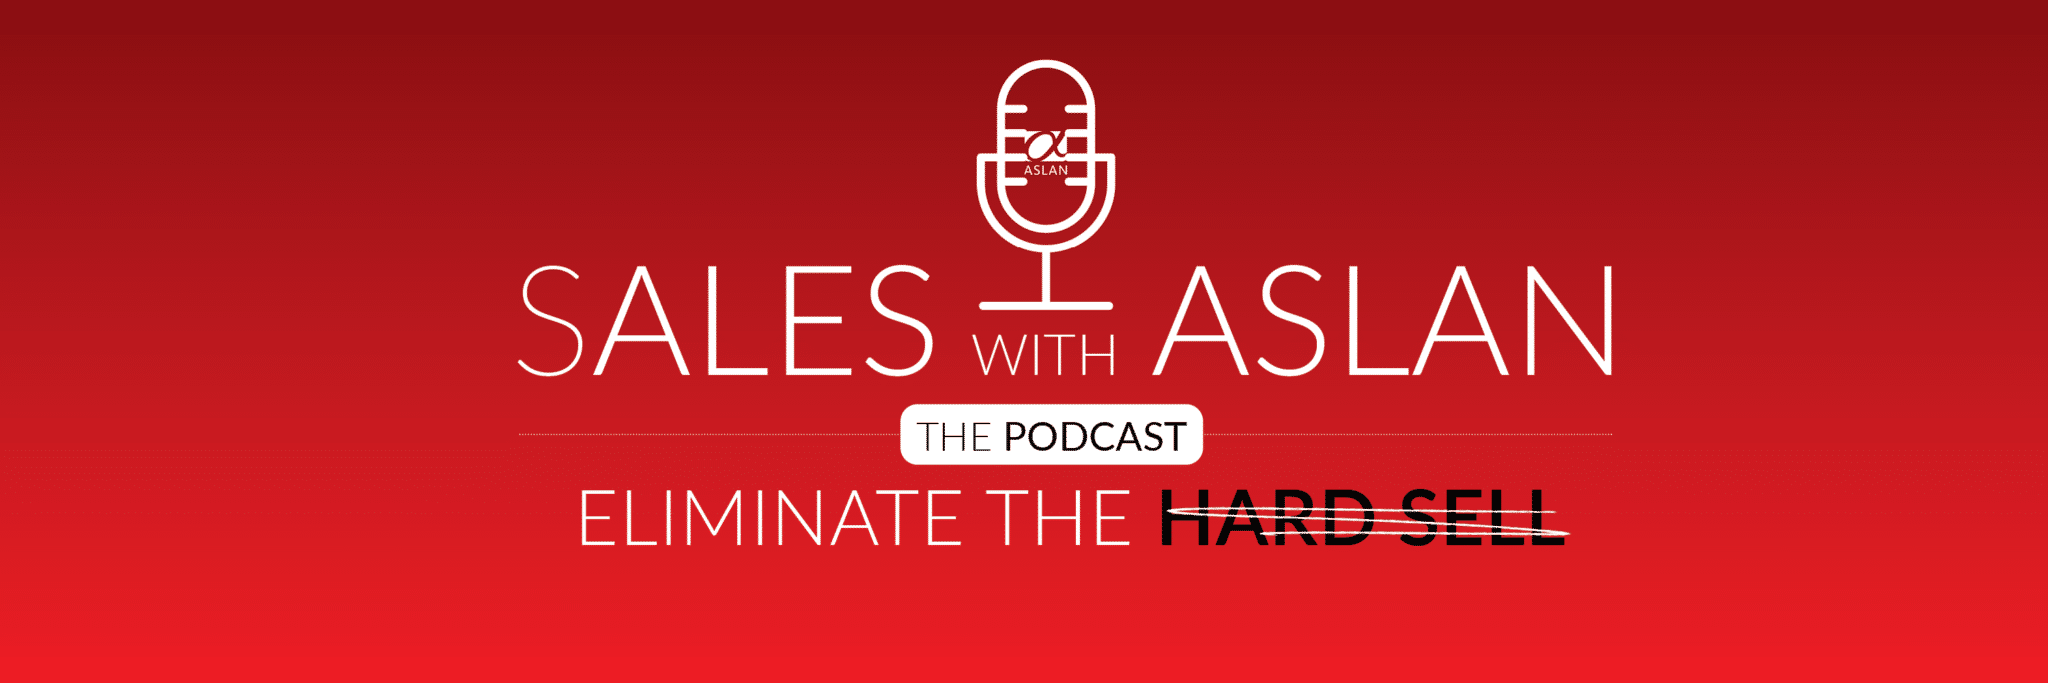 In this episode, In the latest episode of SALES with ASLAN, Tom and Tab are joined by special guest, Marc Lamson, to continue their discussion from last week’s episode about relationships and why they matter in sales.  They unpack how relationships determine our level of influence (whether in our personal lives, with customers, or as sales leaders), and how emotions play into decision-making, even in a business setting. Because at the end of the day, everyone simply wants to feel uniquely valued and understood.